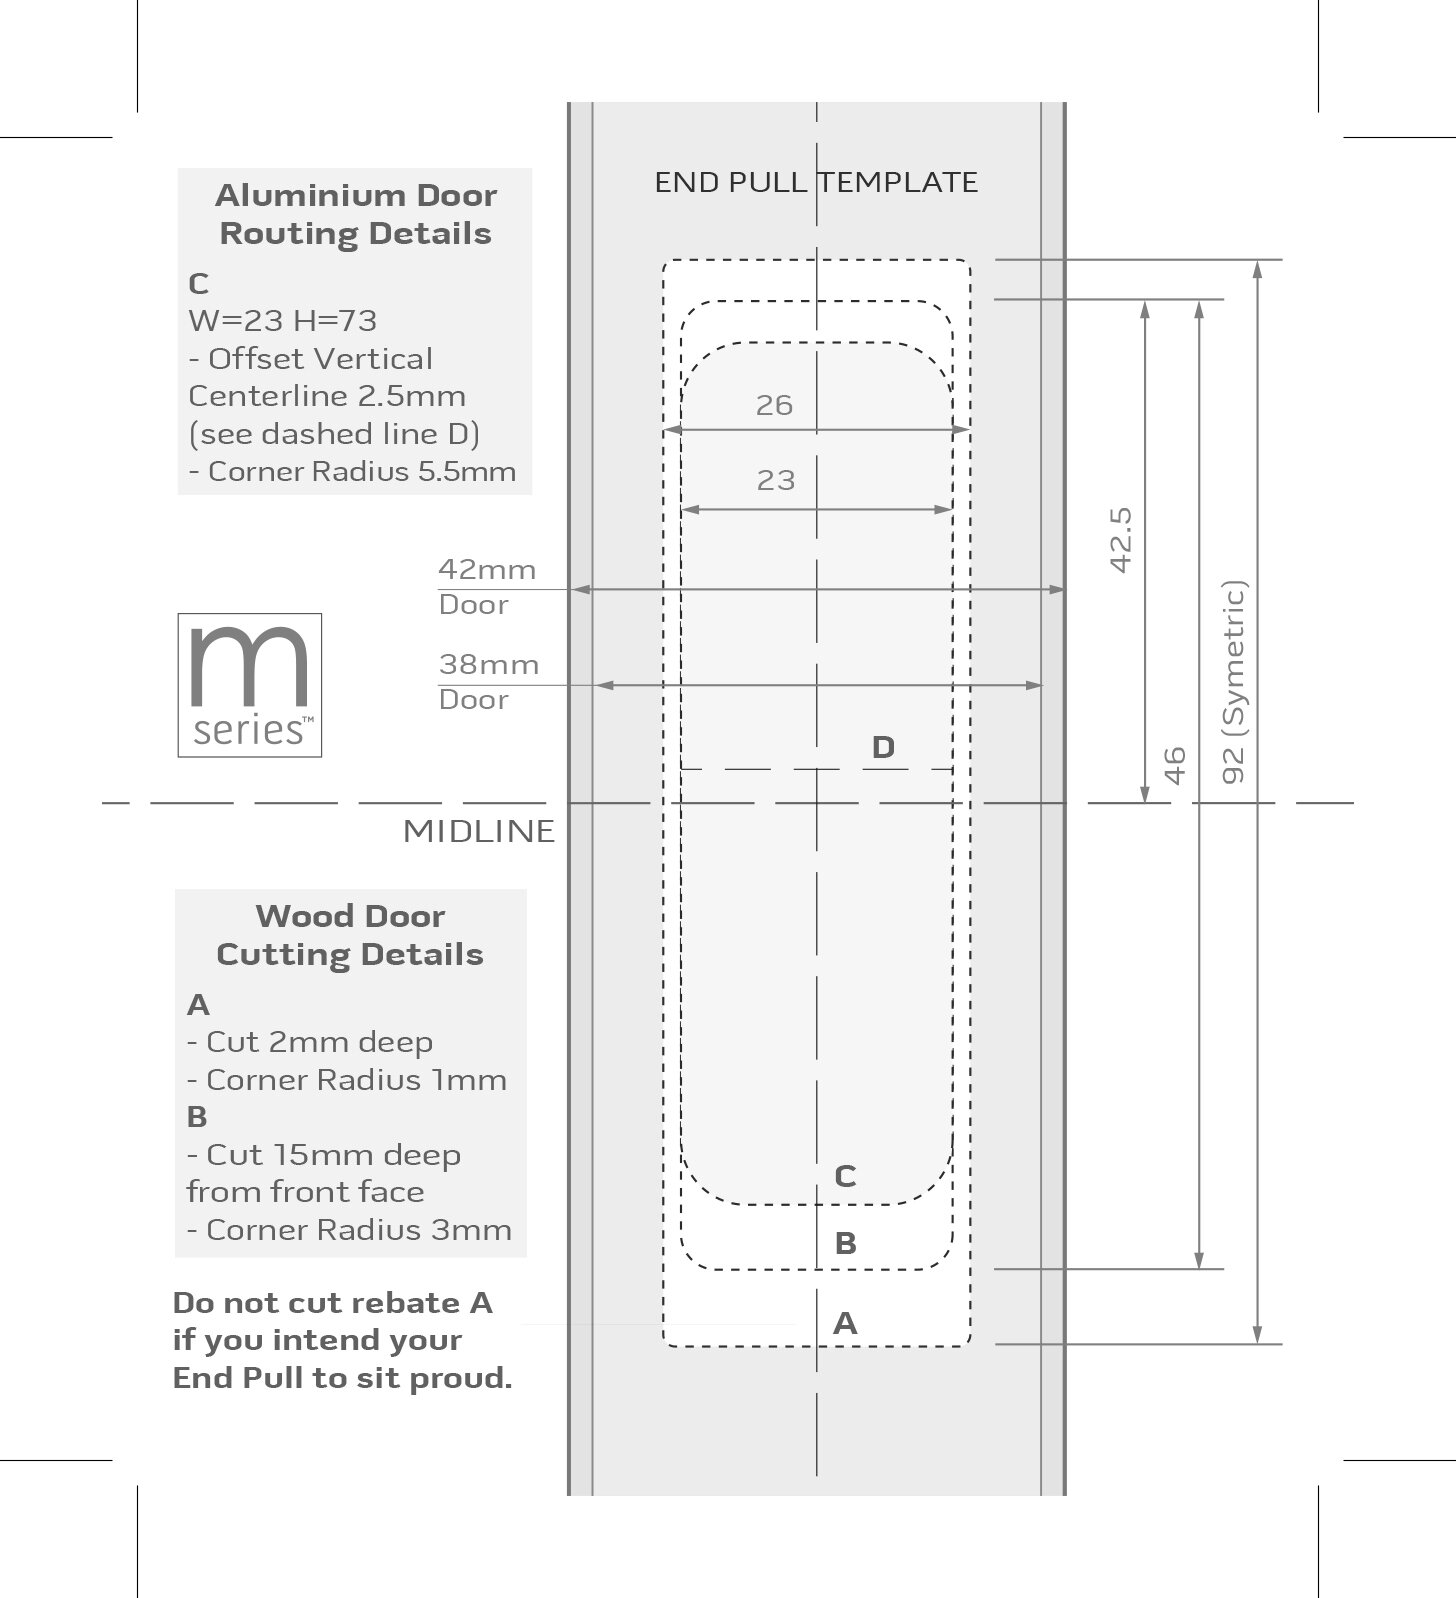 Mardeco 8001 - End Pull - Template - Sliding door mounted